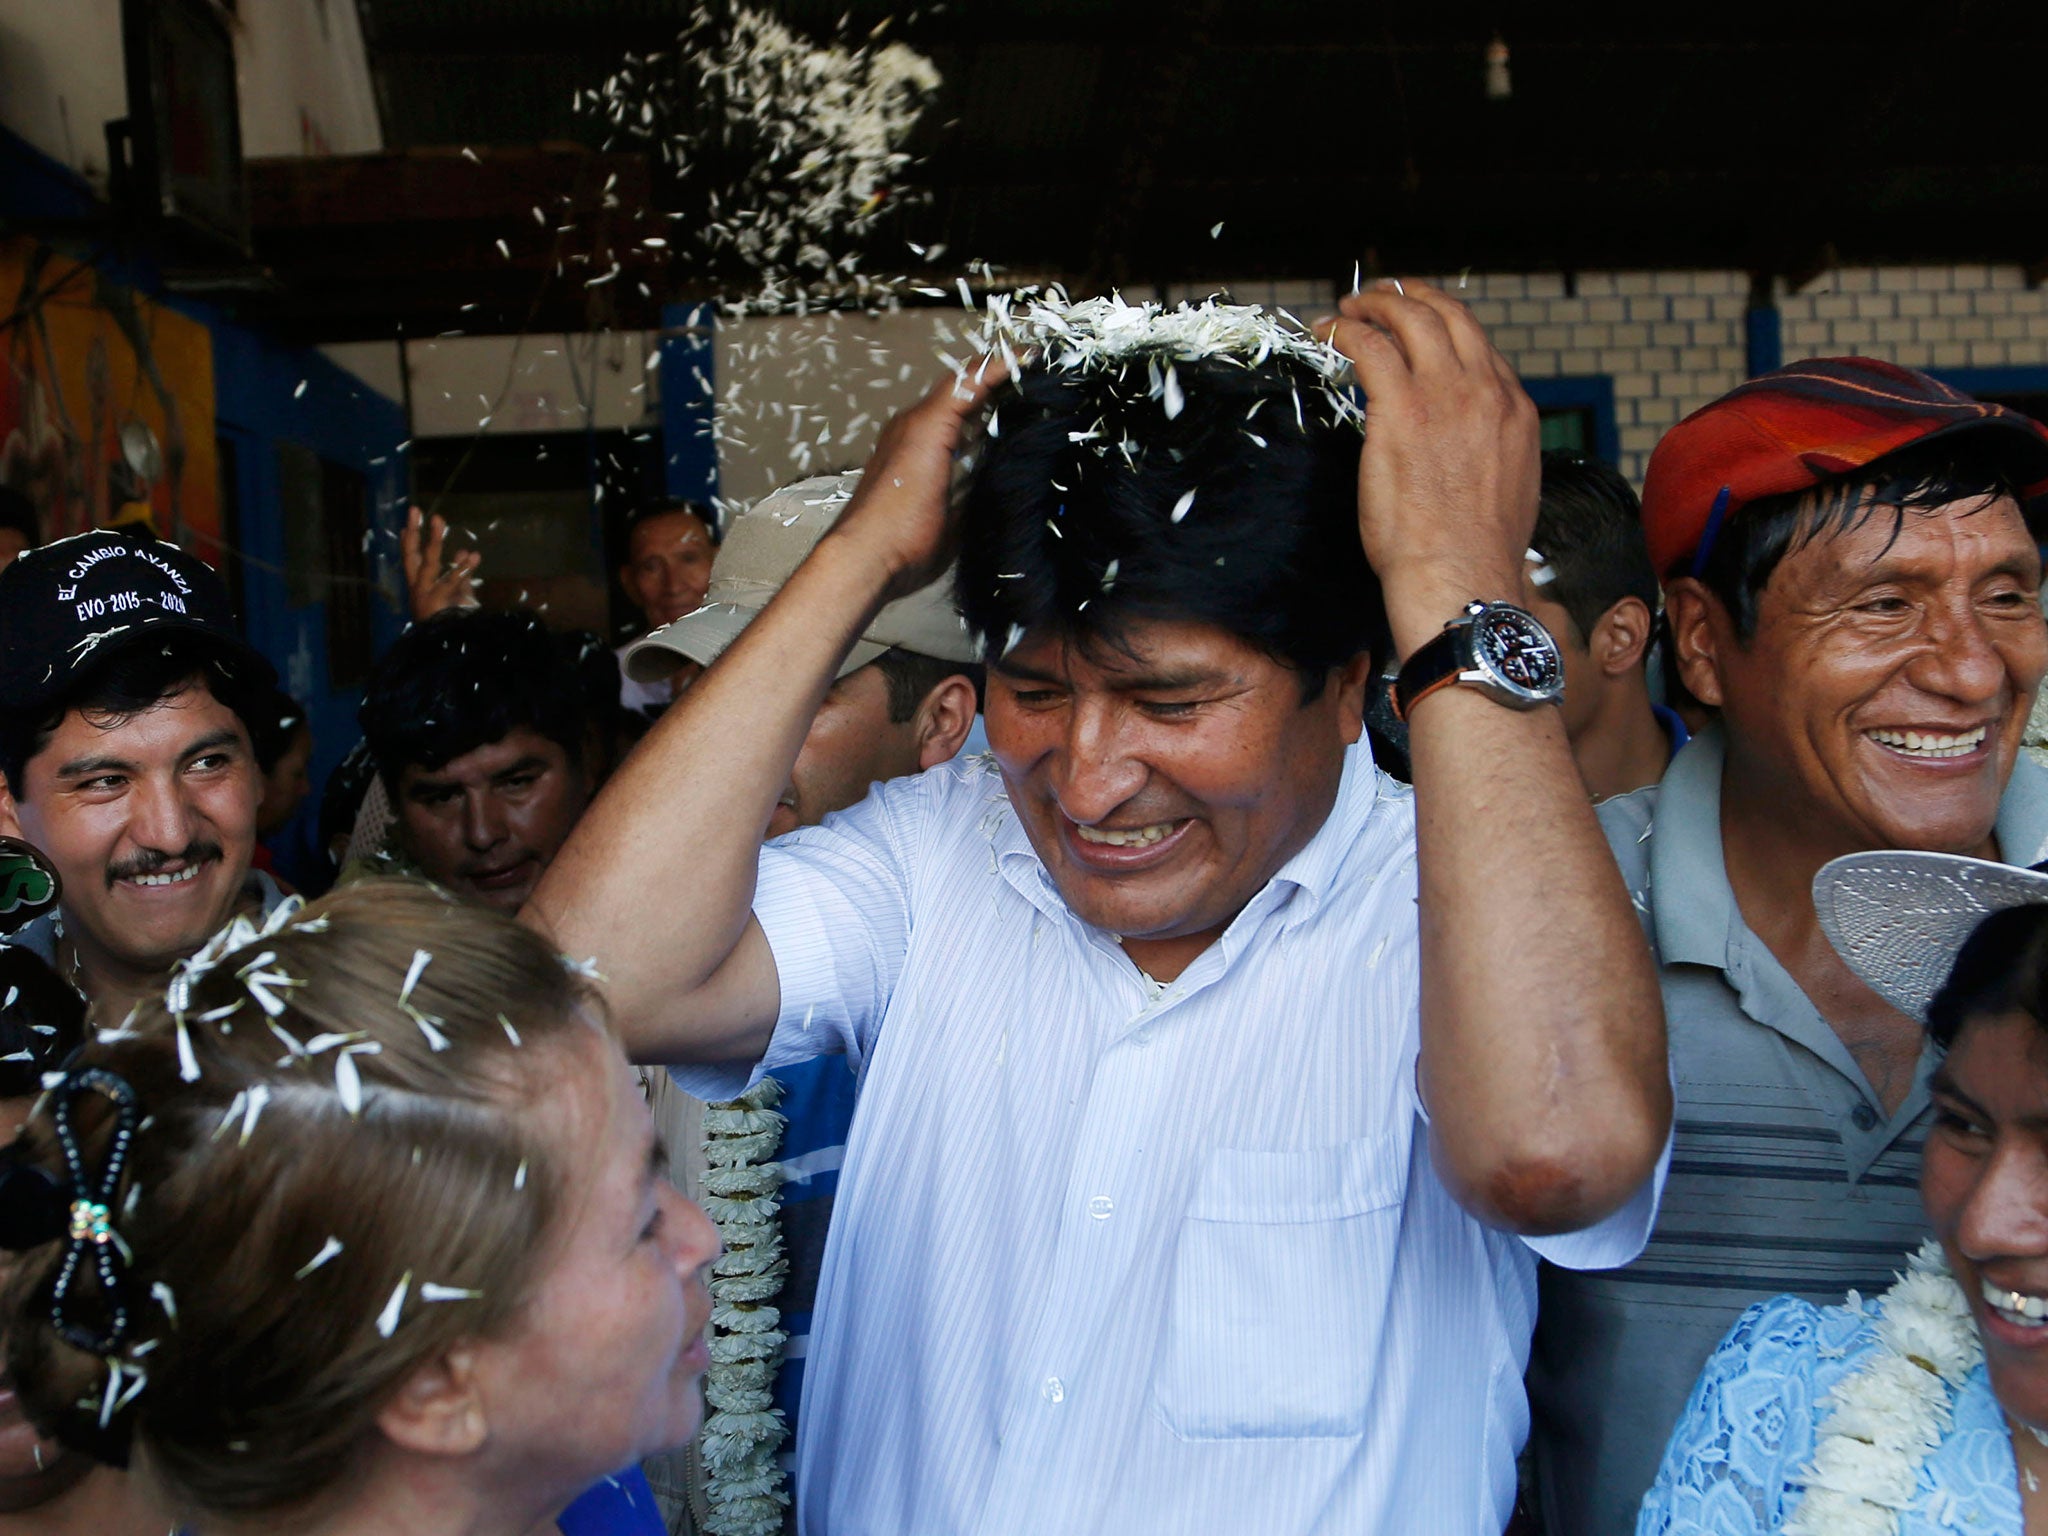 Bolivia's President Evo Morales in greeted by supporters upon his arrival to vote at a polling station